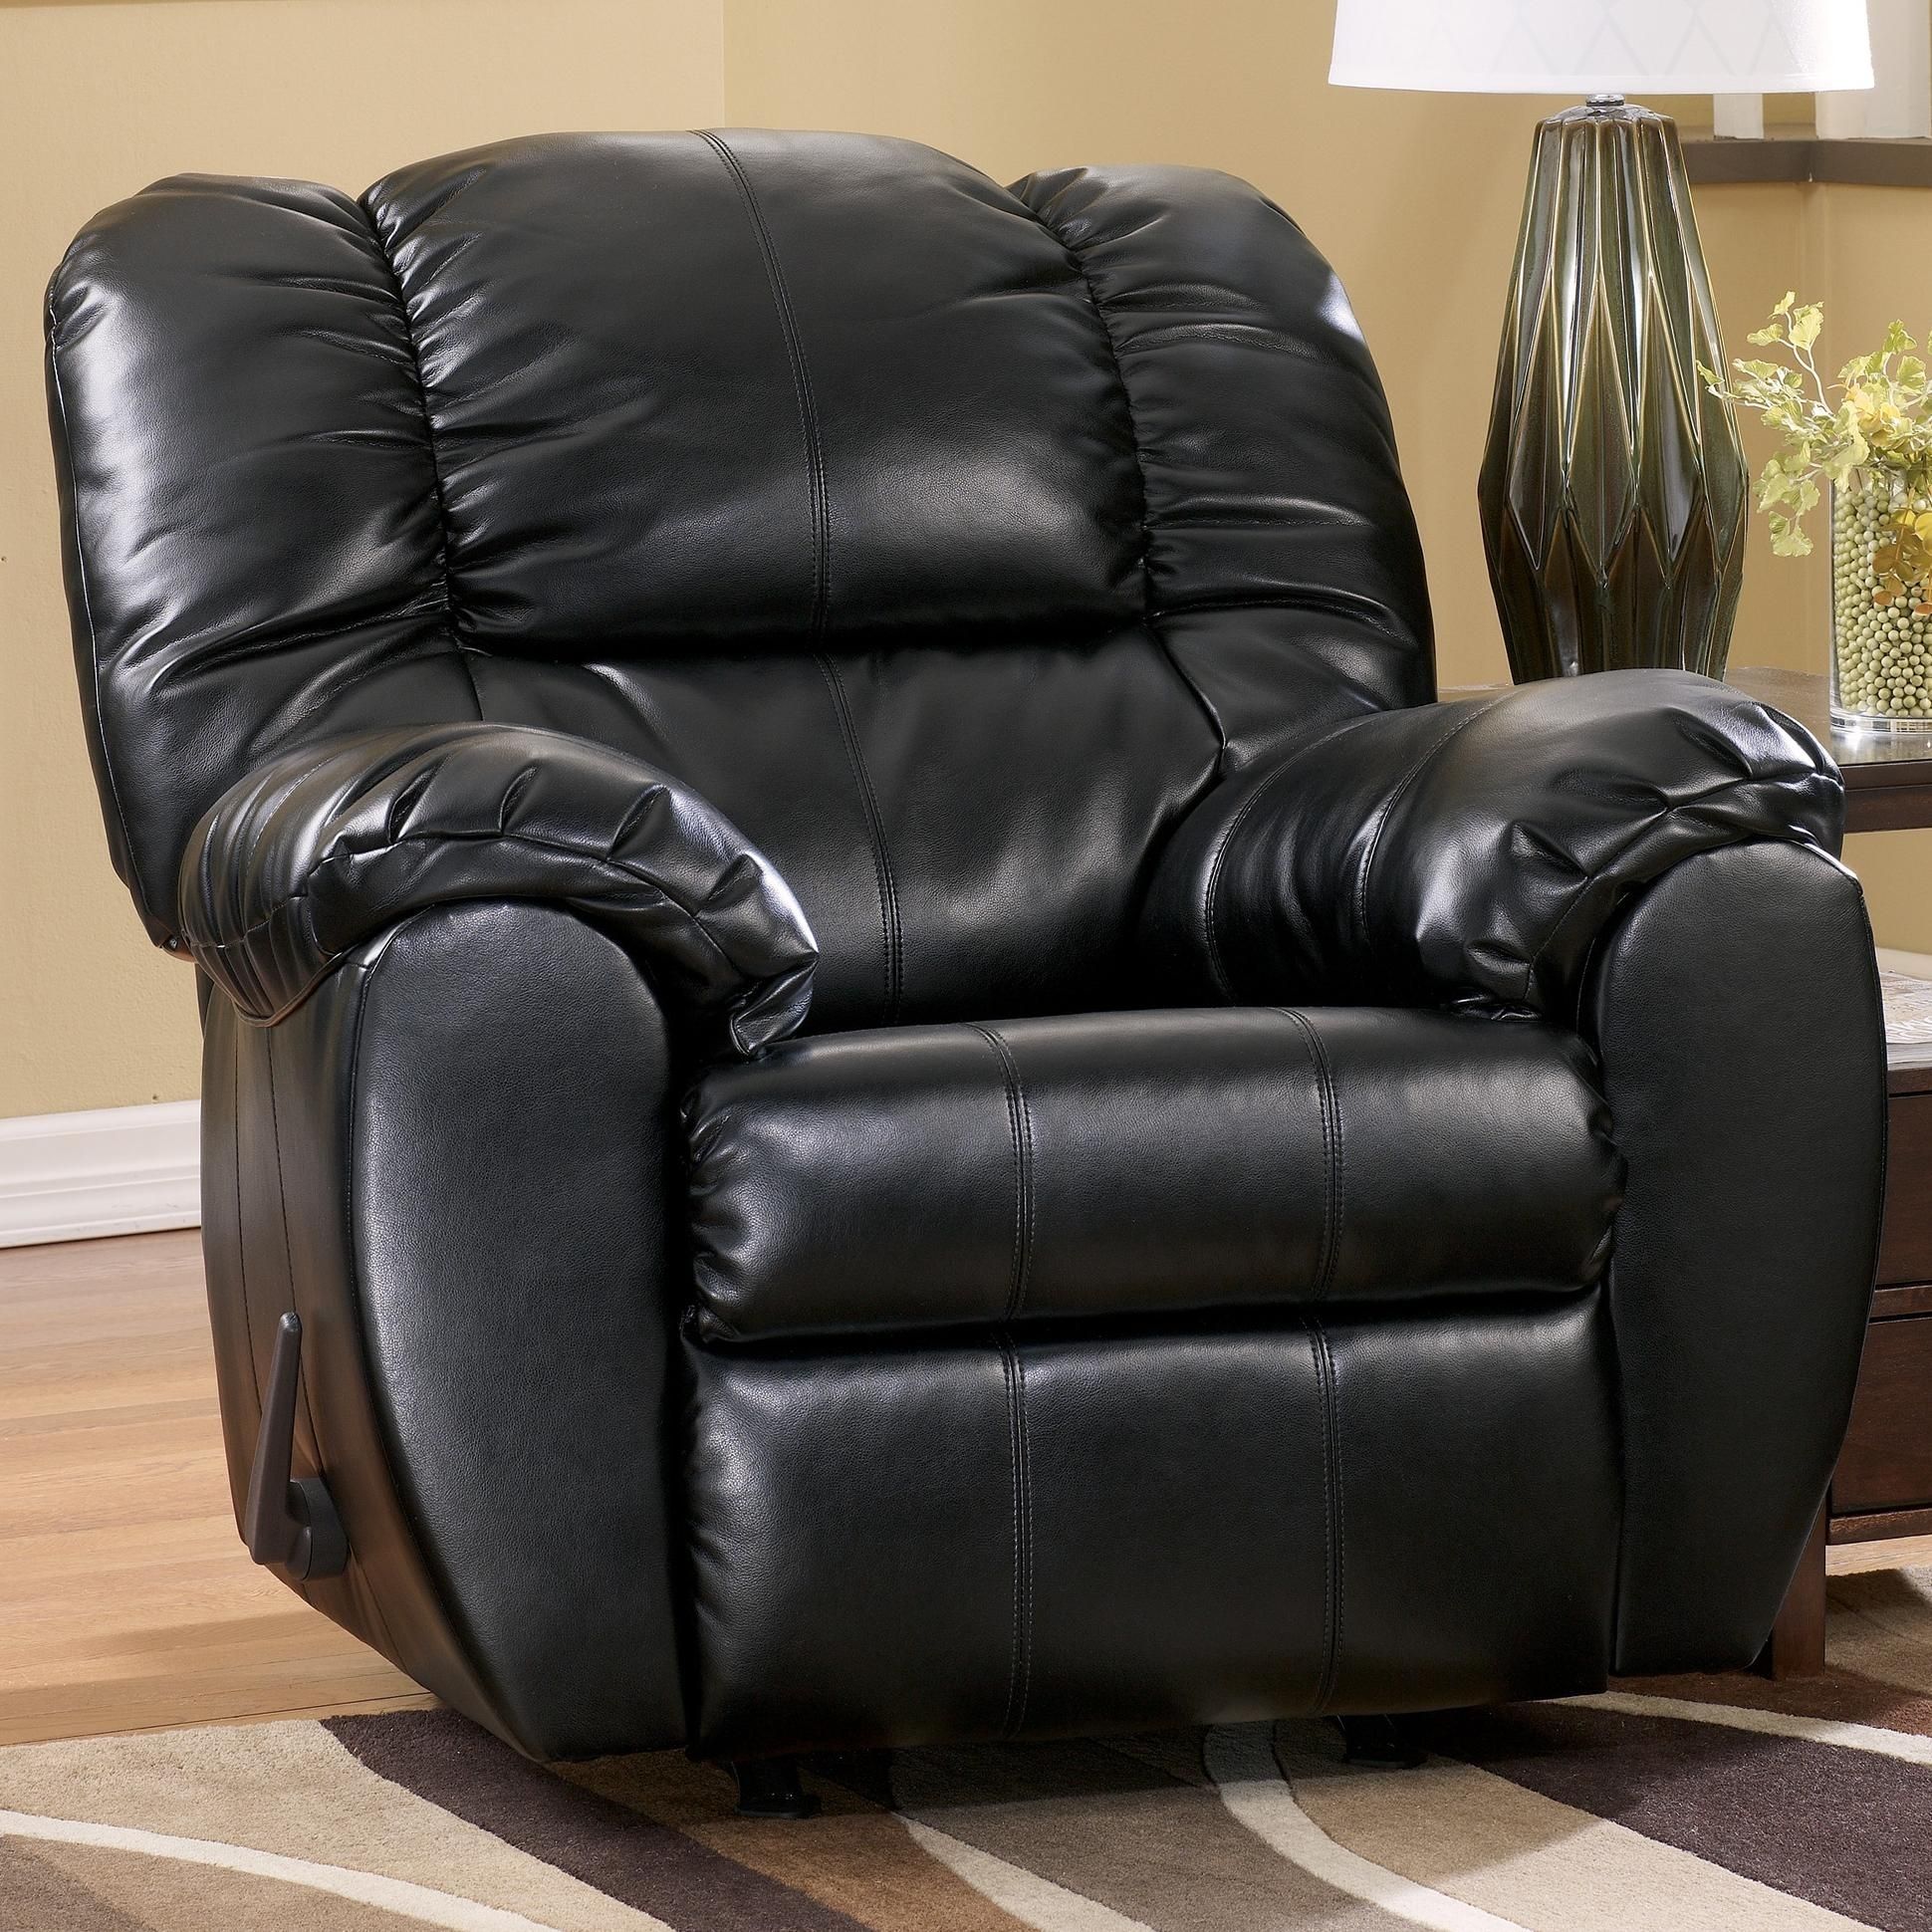 Dylan Durablend – Onyx Bonded Leather Match Rocker Recliner Inside Declan 3 Piece Power Reclining Sectionals With Left Facing Console Loveseat (View 3 of 30)